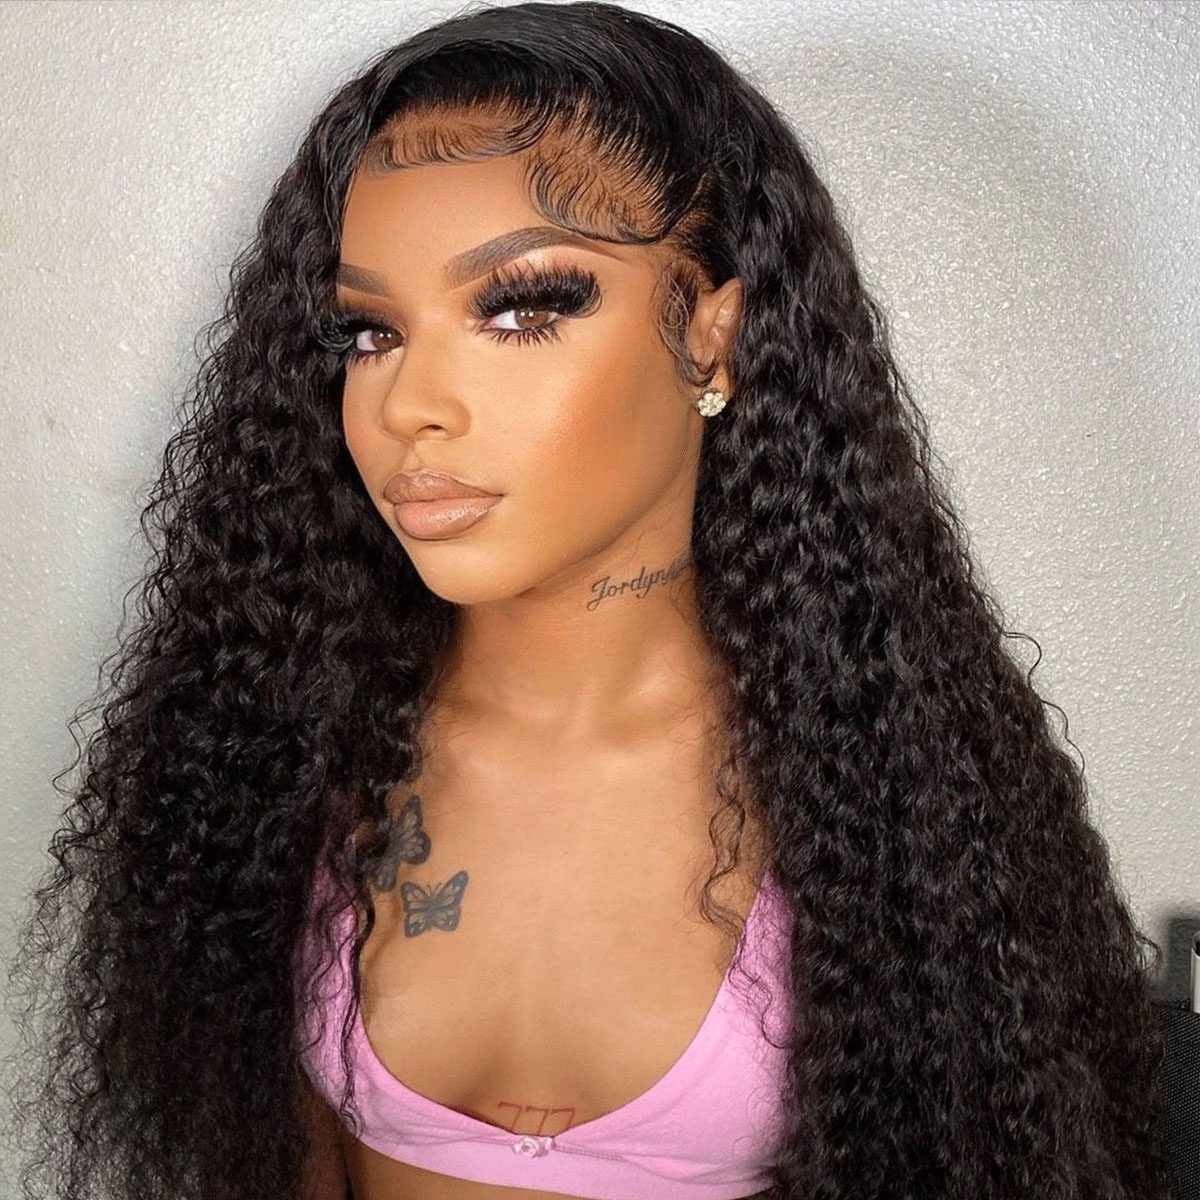 Curly 360 Lace Frontal Wig Deep Curly